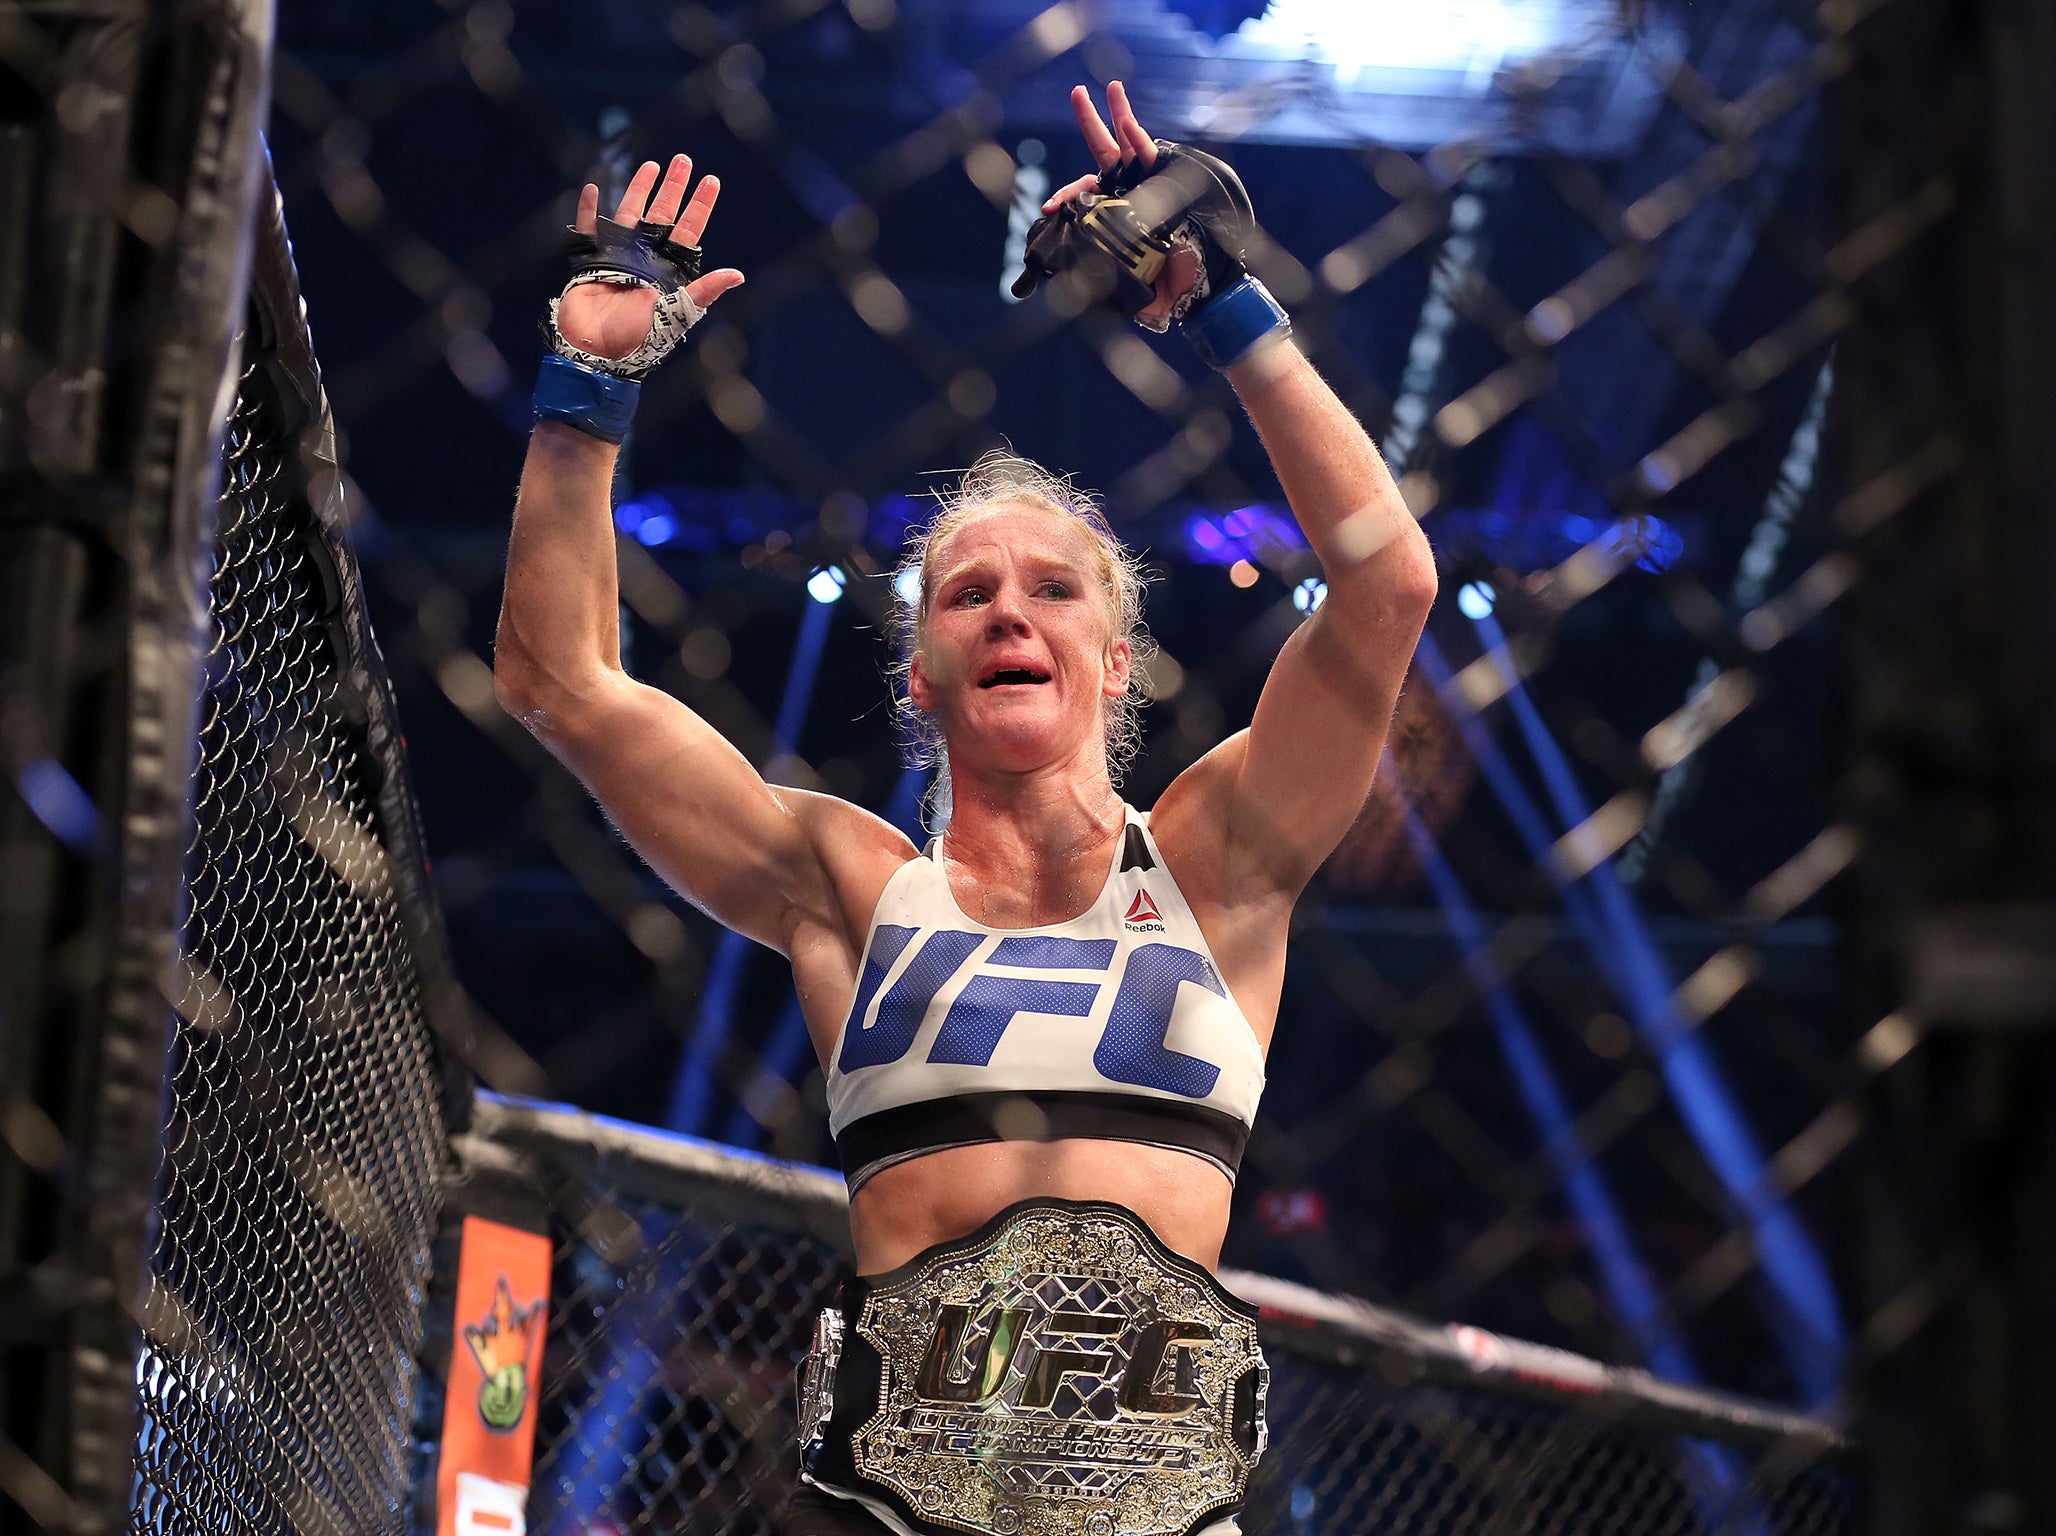 Holm stunned Rousey at UFC 193